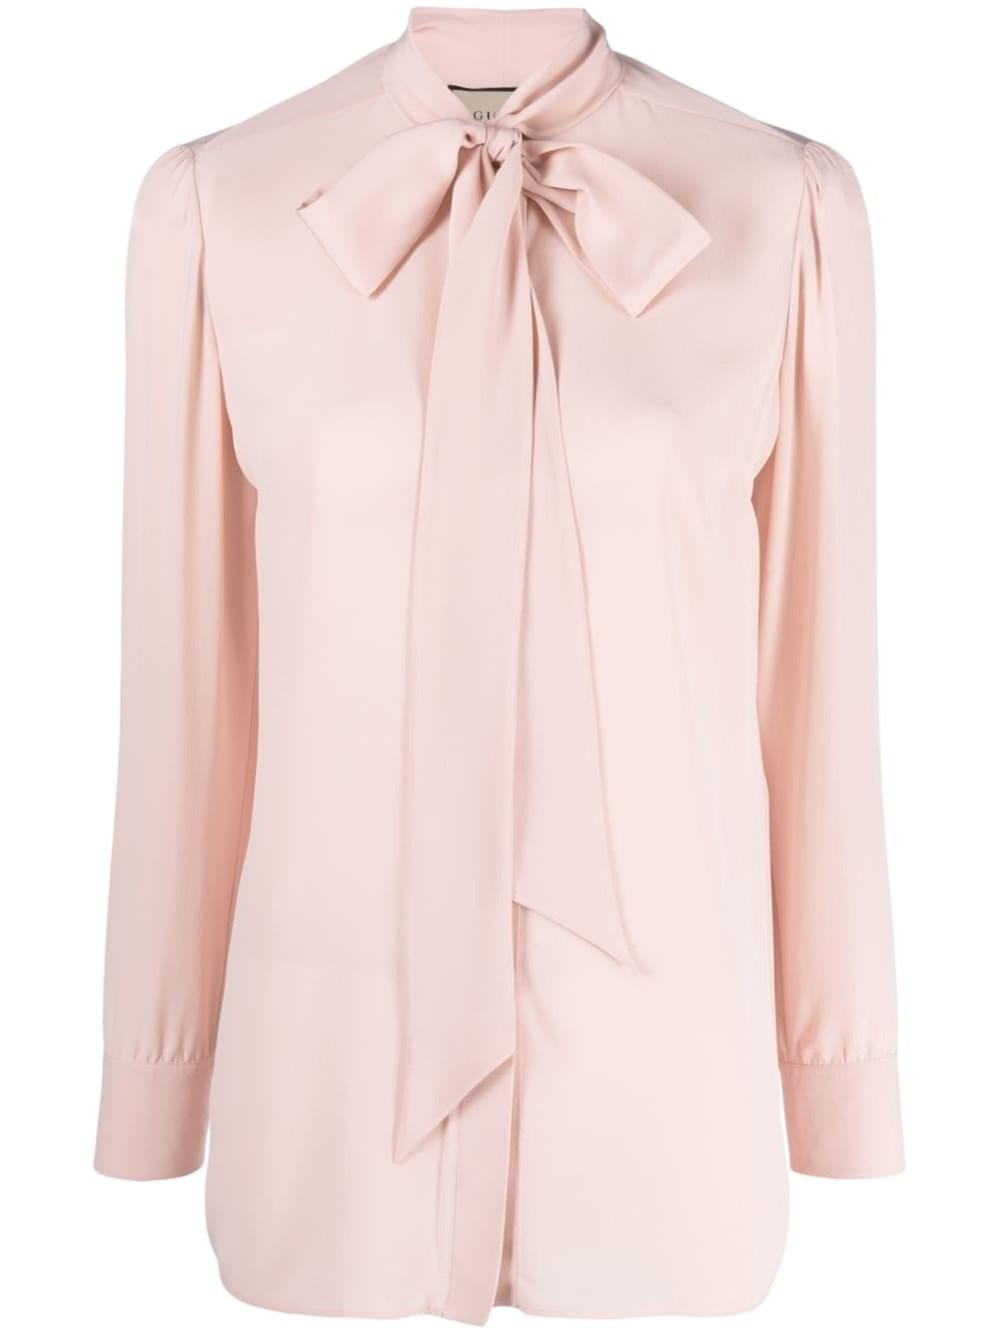 Gucci Bow-tie Silk Shirt in Pink | Lyst